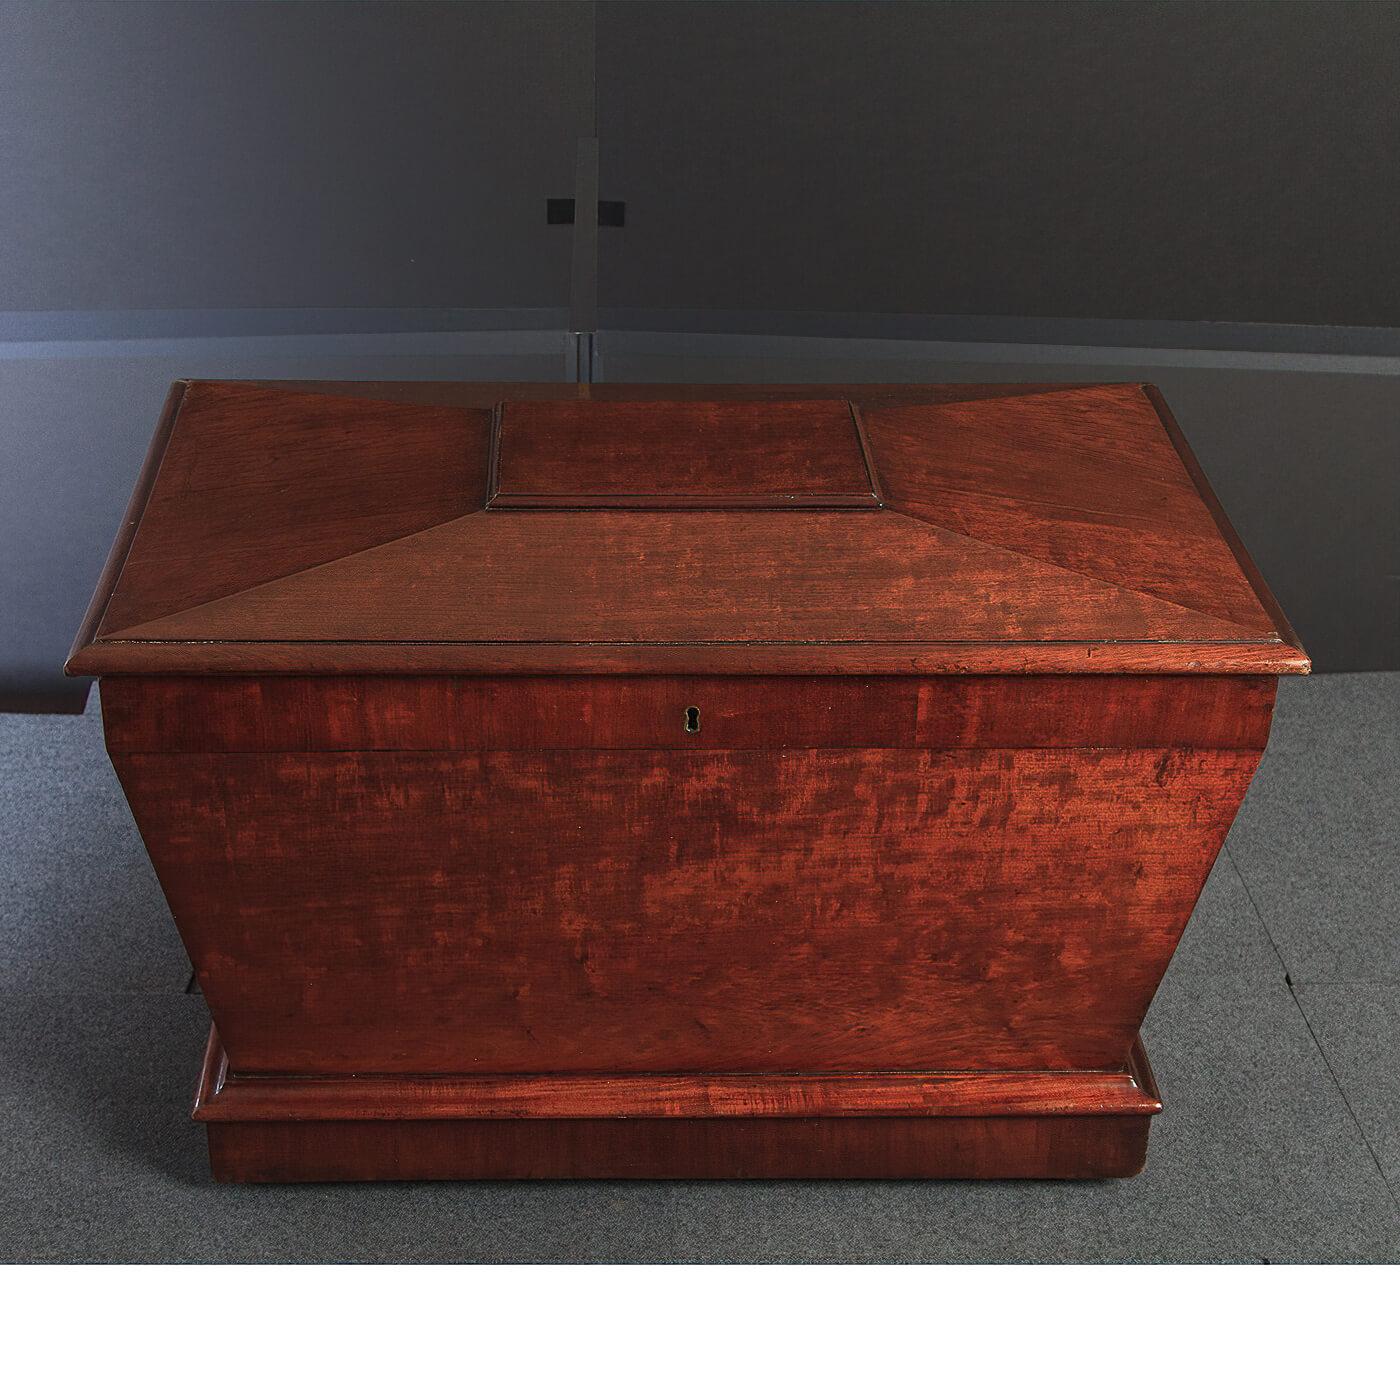 A fine English Regency mahogany sarcophagus form cellarette. With a lift top, lion head bronze mounts with ring handles and raised on casters. England, circa 1810.

Dimensions: 29